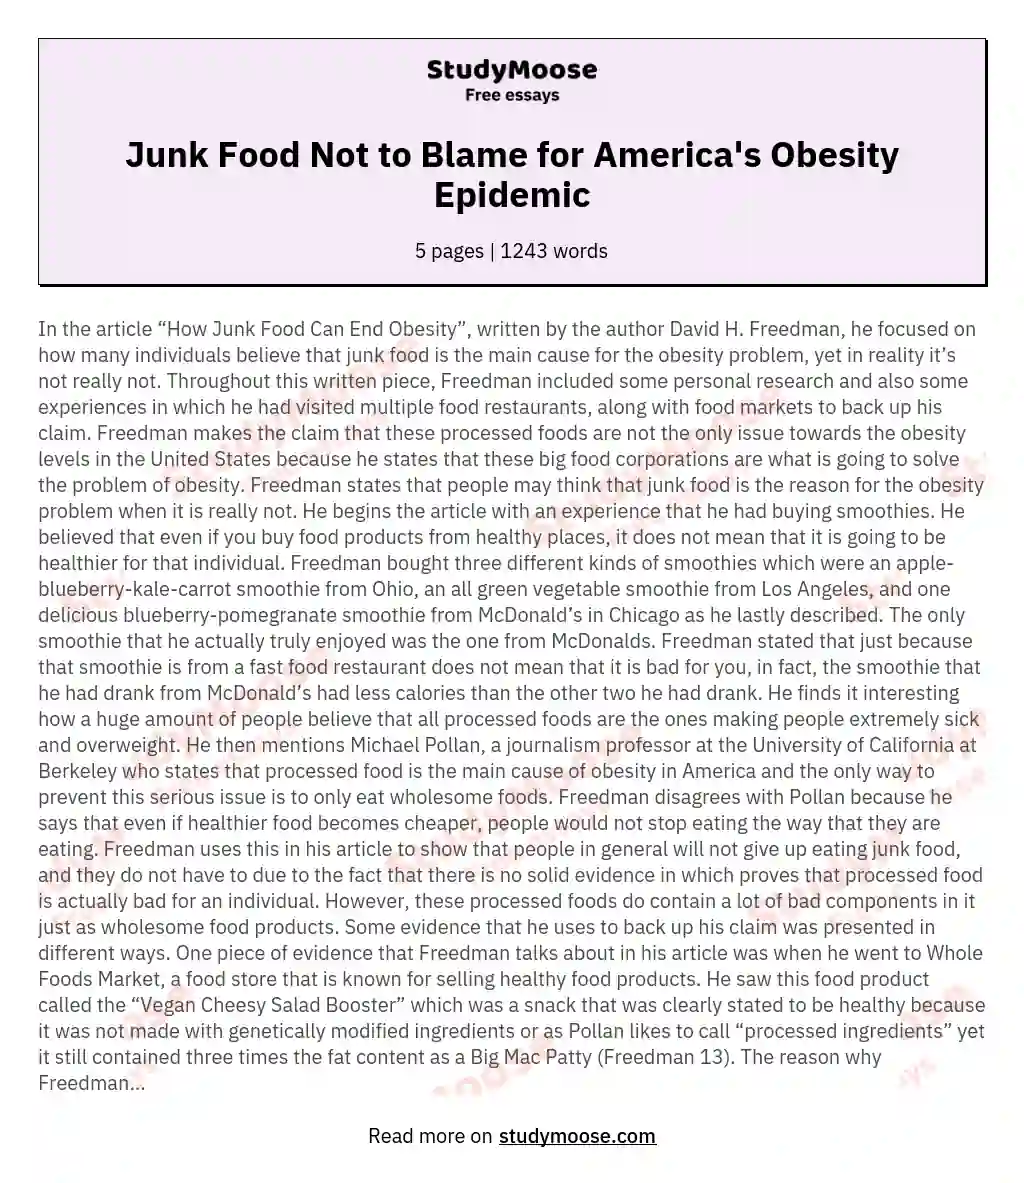 Junk Food Not to Blame for America's Obesity Epidemic